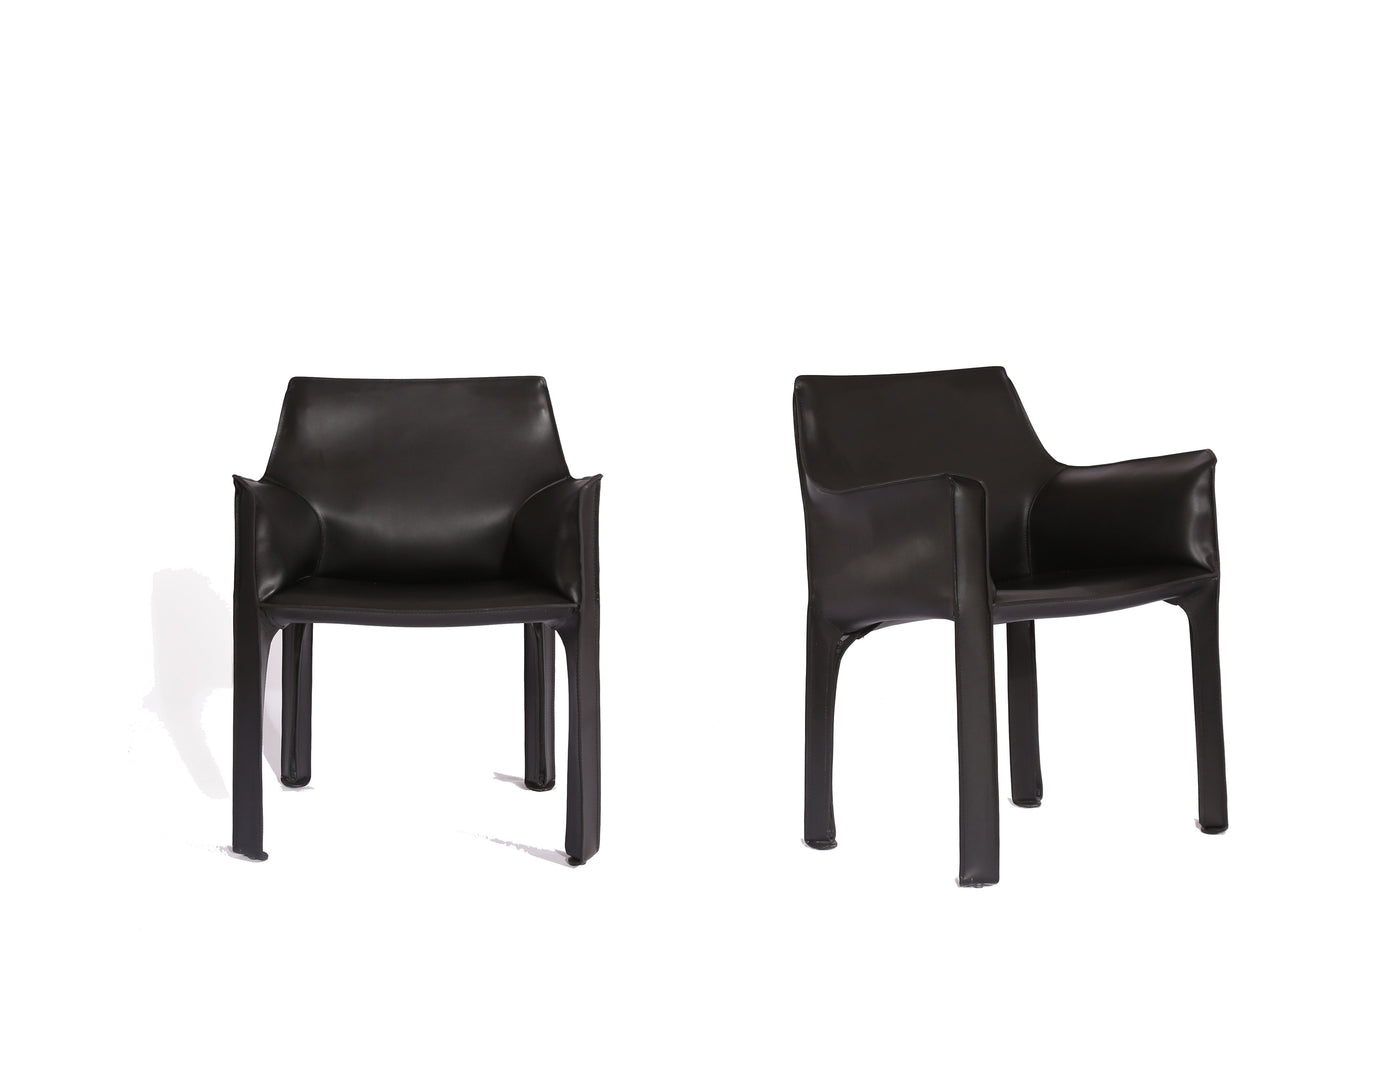 Cab 413 Saddle leather dining chairs - Retro Modern Designs